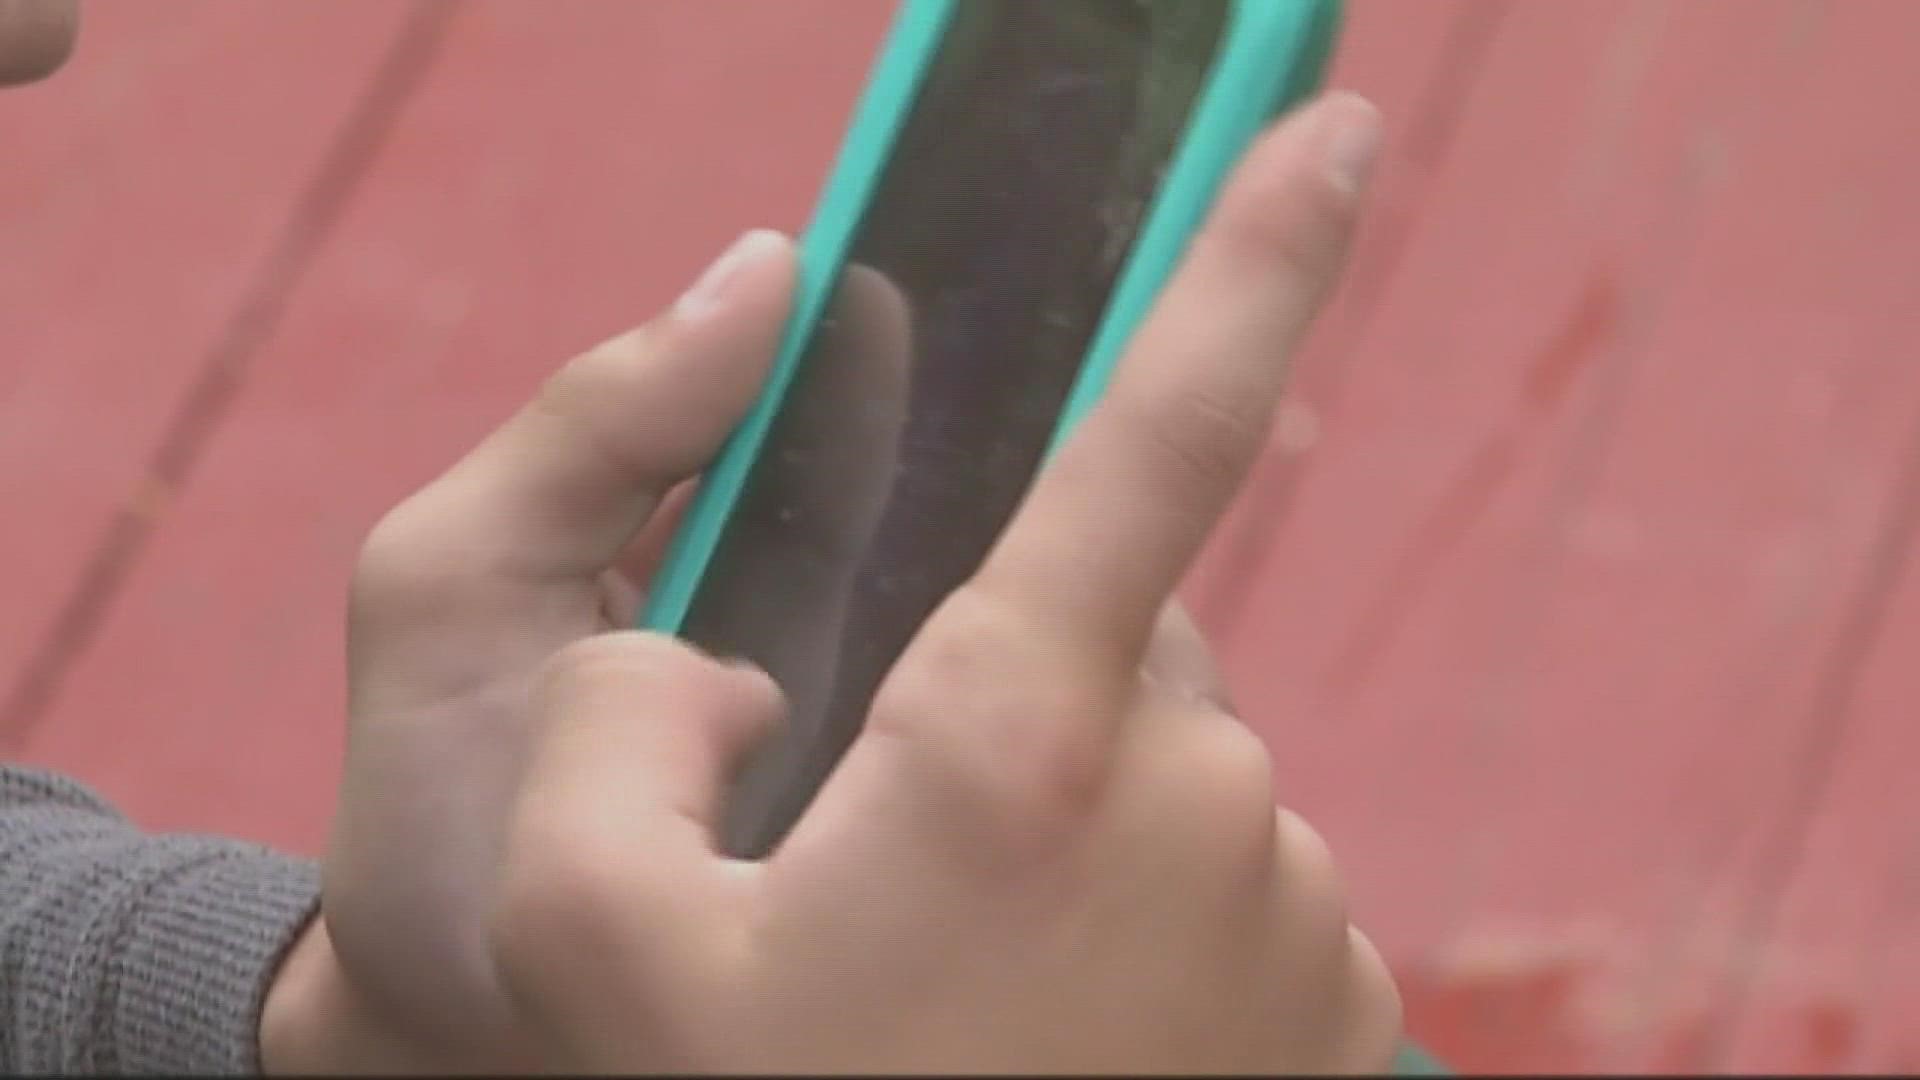 Mental health experts said social media use is a major factor in the mental health of children in Tennessee.